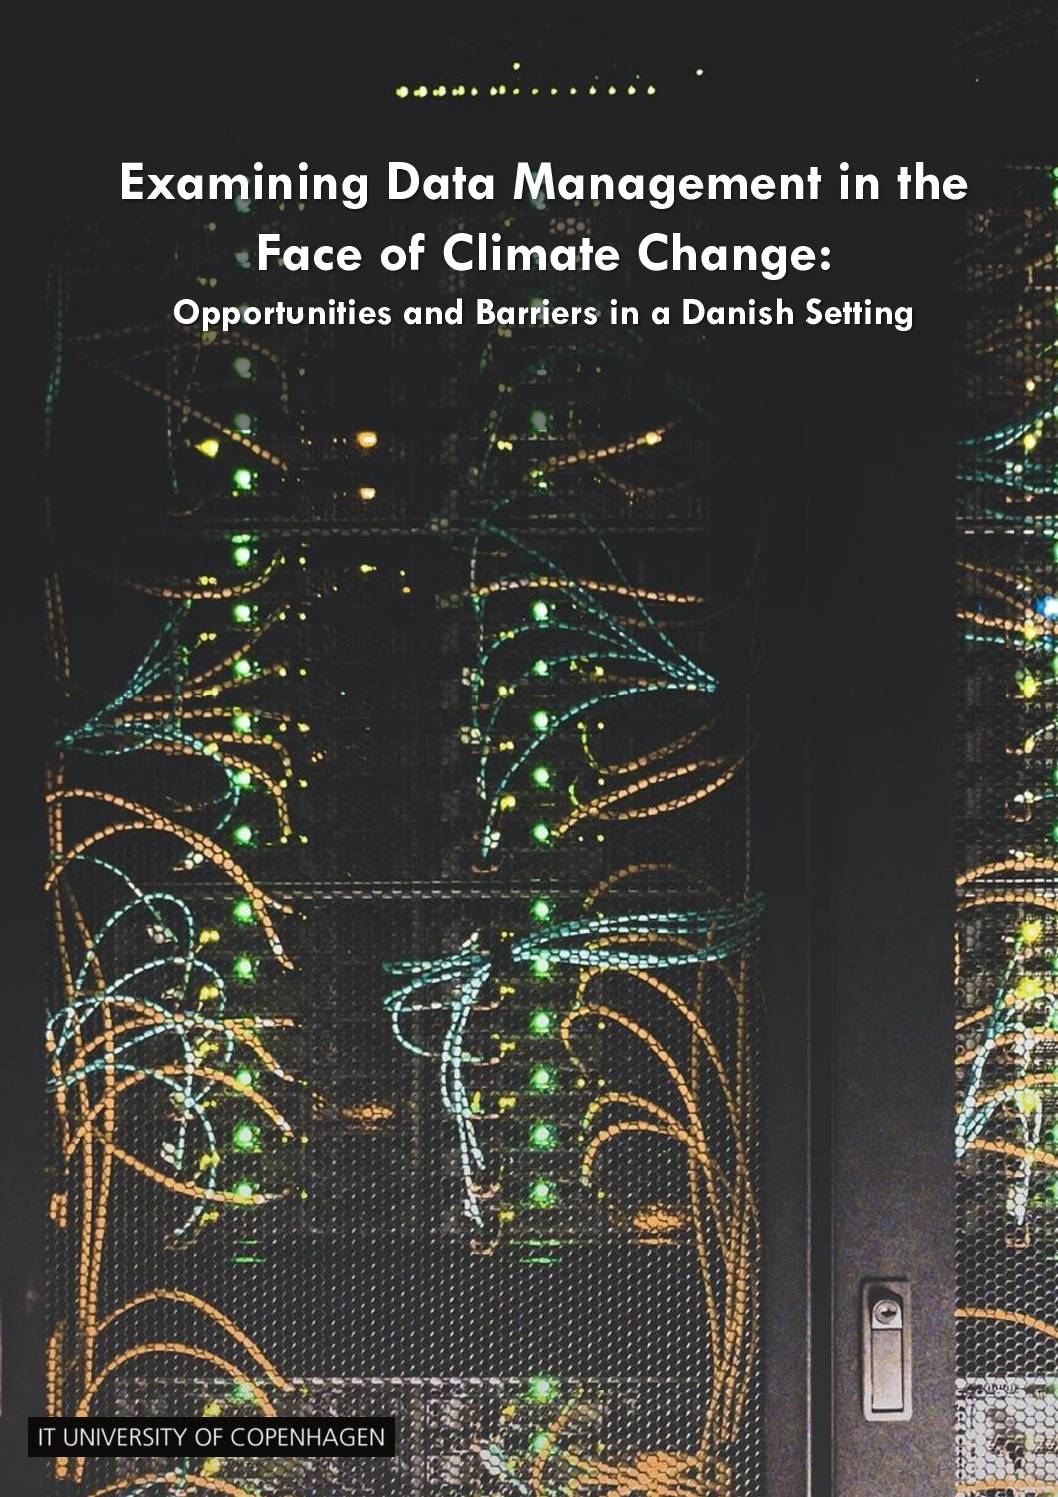 Examining Data Management in the Face of Climate Change (Presentation)